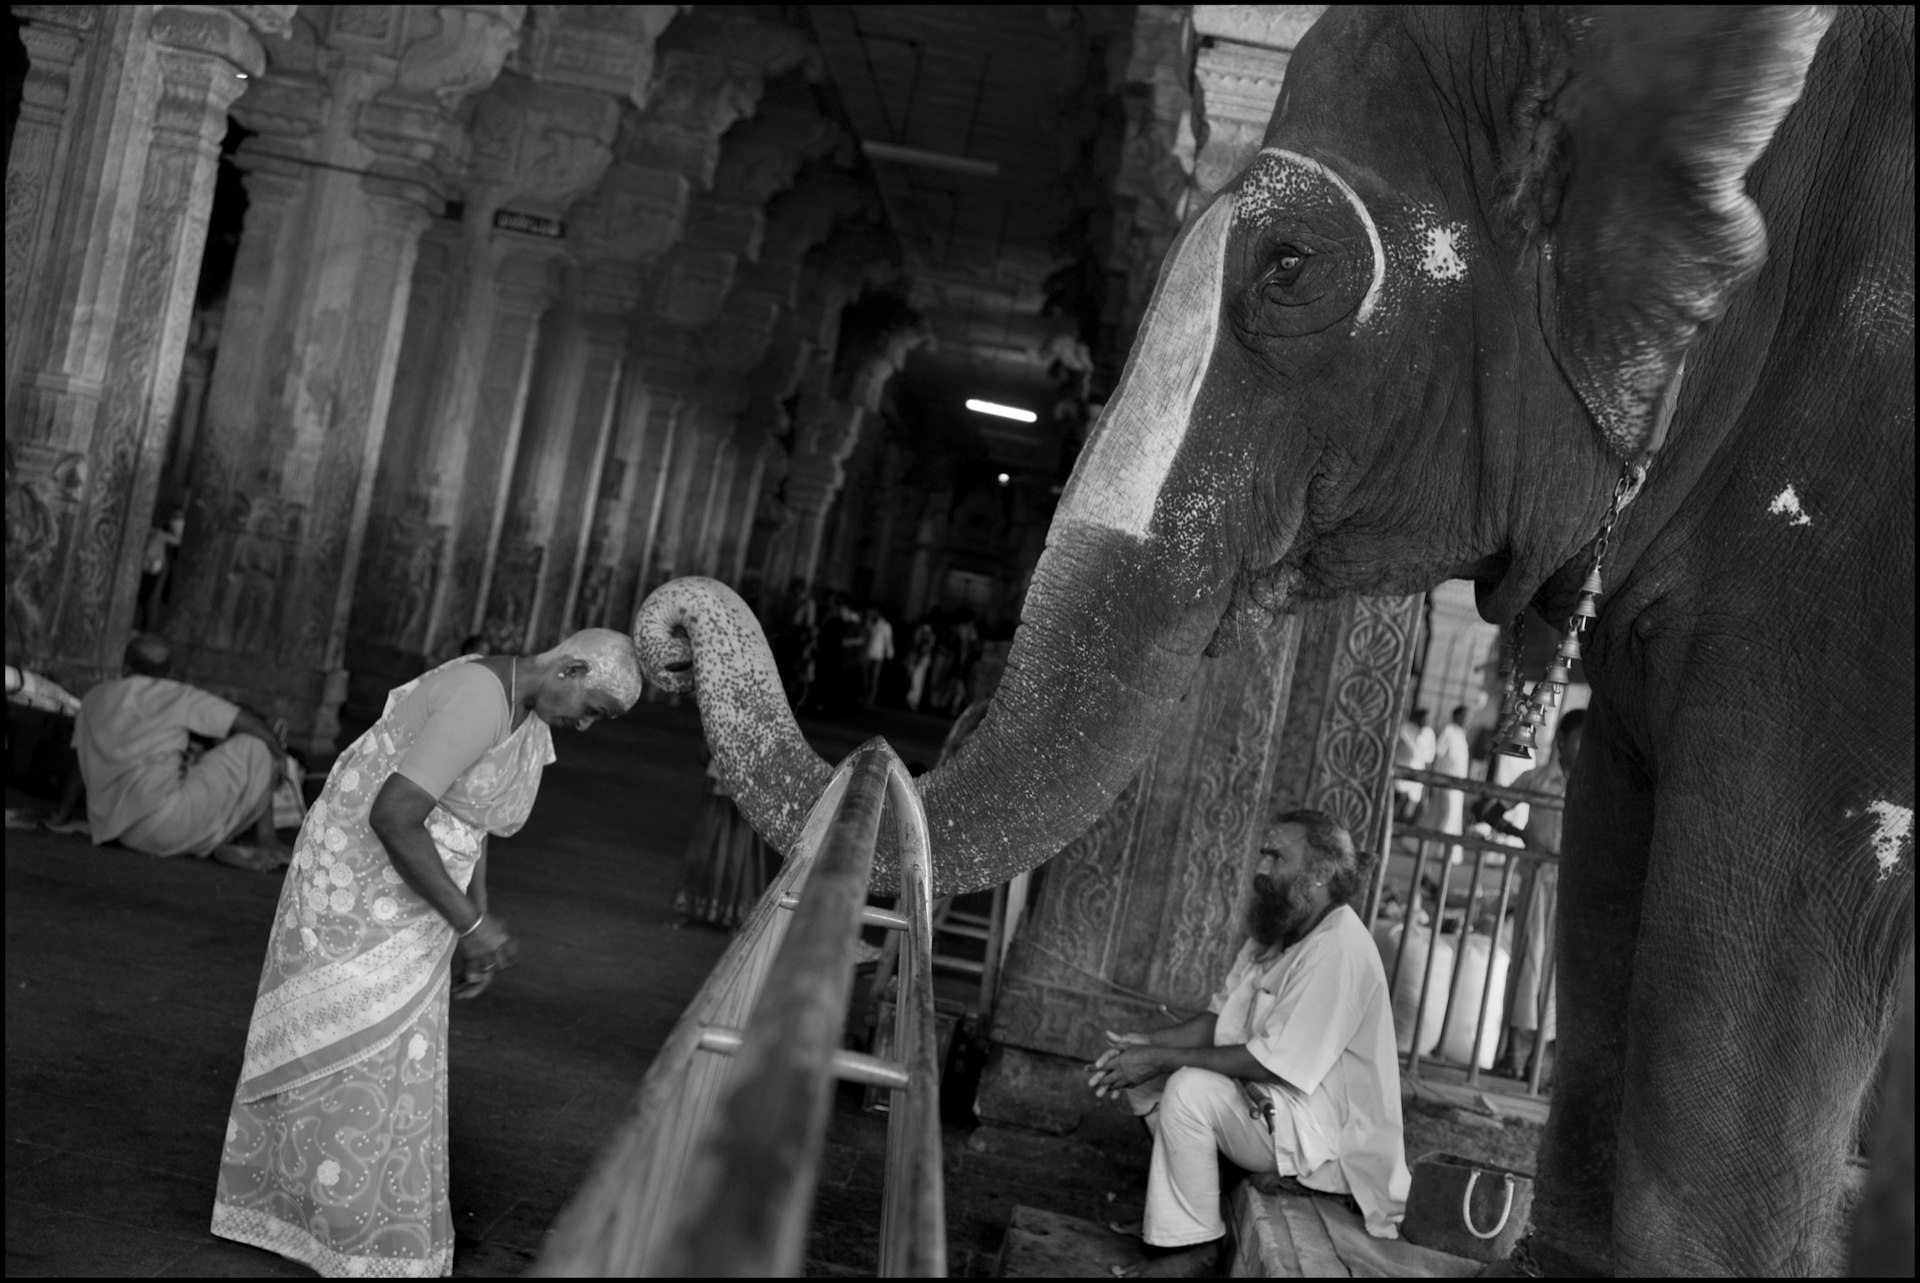 At the Sri Ranganathaswamy temple, an elephant blesses a pilgrim with its trunk after receiving a cash donation. The pilgrim has offered her hair to a resident deity, and her shaved head is covered with tumeric paste for protection; Tiruchirapalli (Trichy), India.